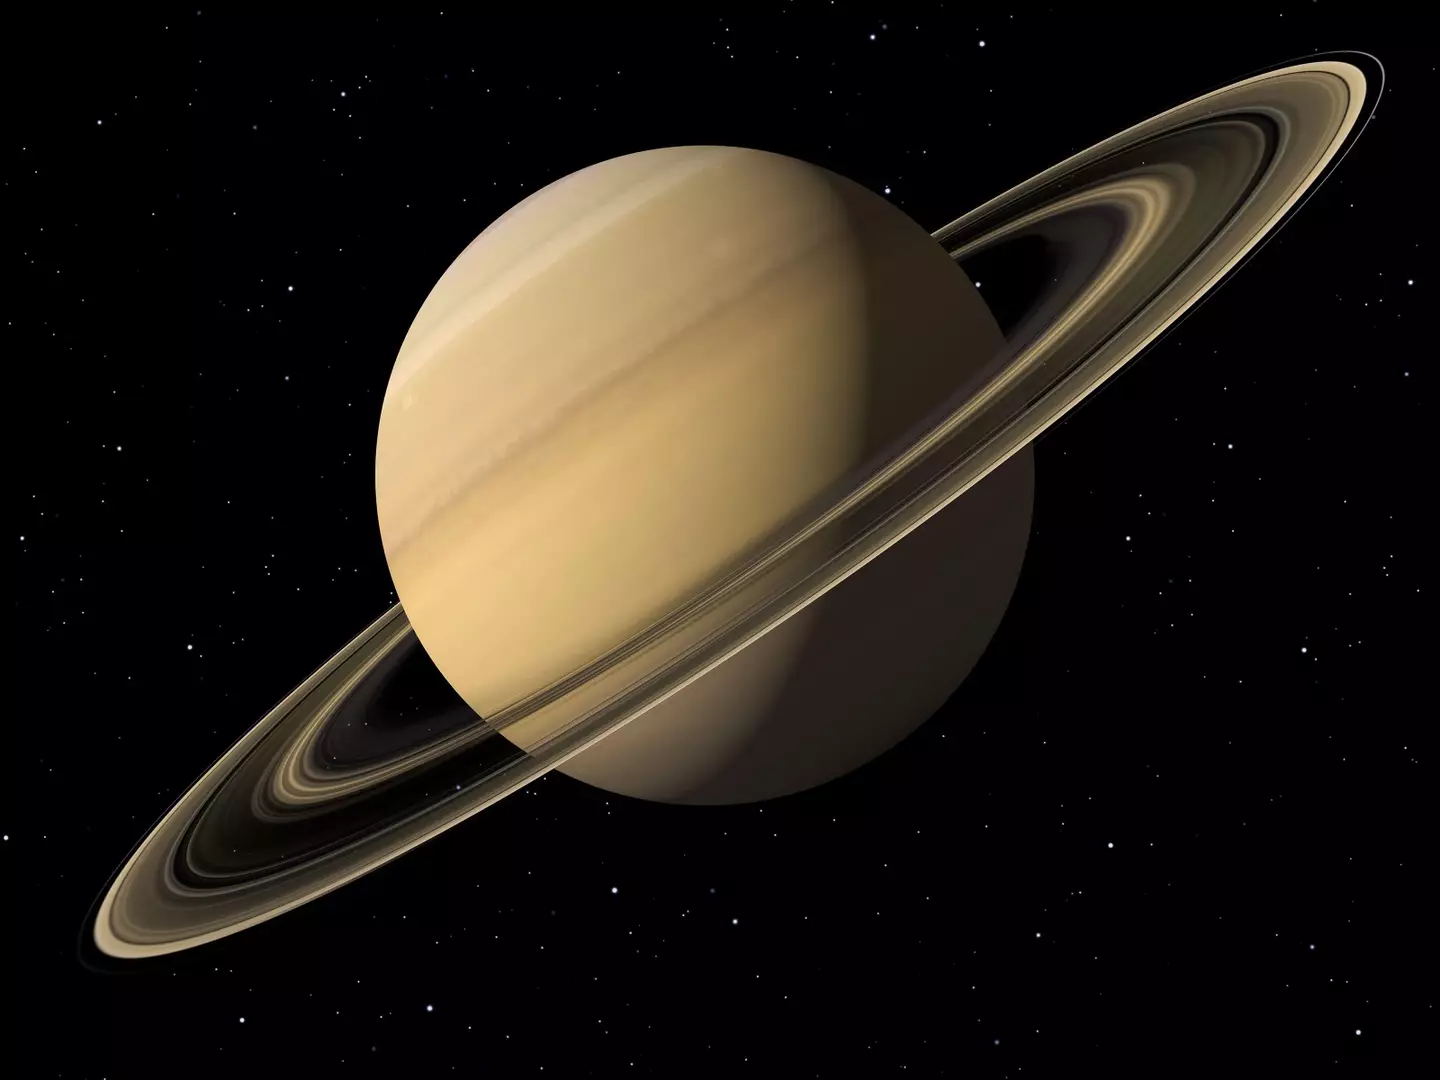 Saturn is losing its rings faster than previously thought.